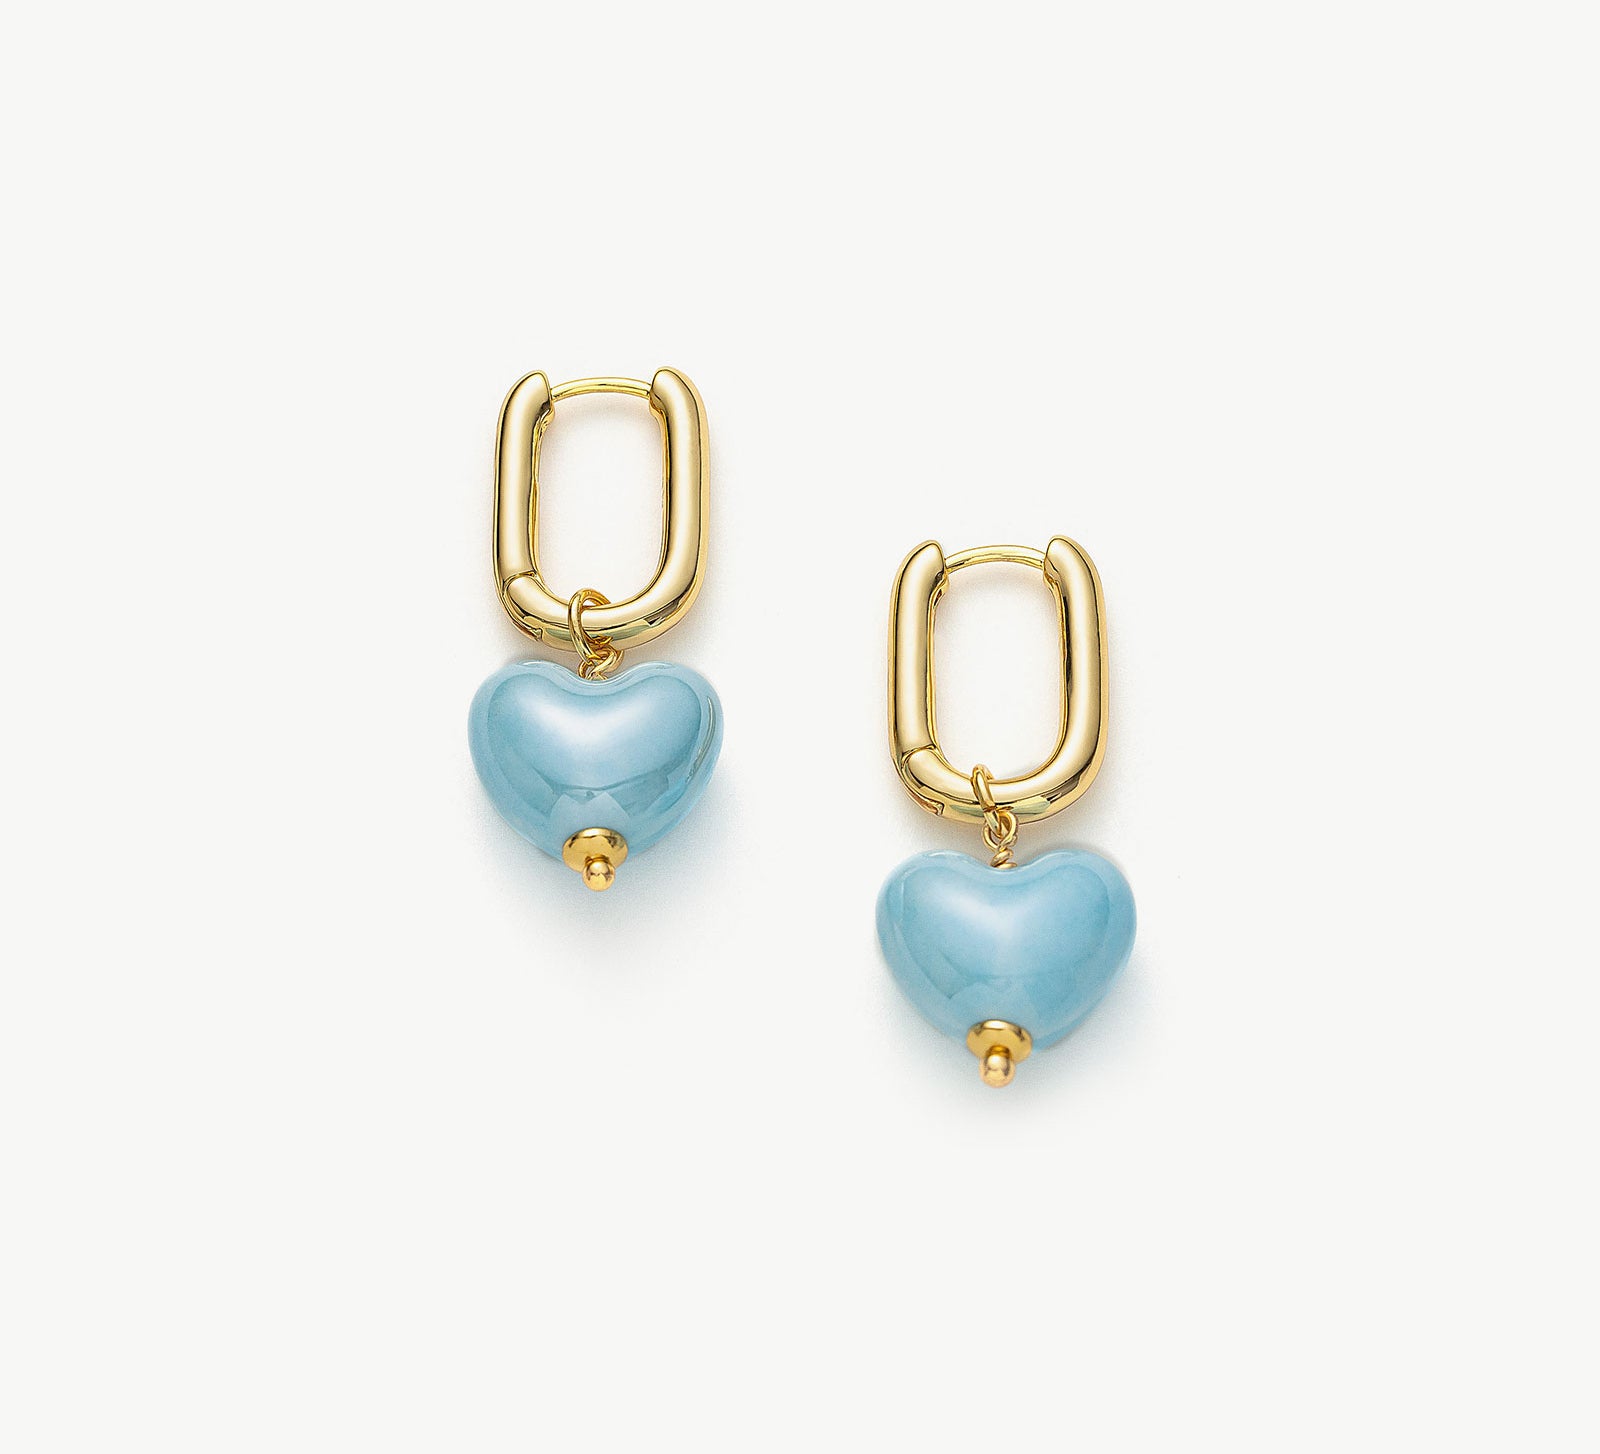  Ceramics Heart Hoop Earrings in Blue, a charming and ceramic accessory that features heart-shaped hoops in a serene and captivating cerulean blue hue